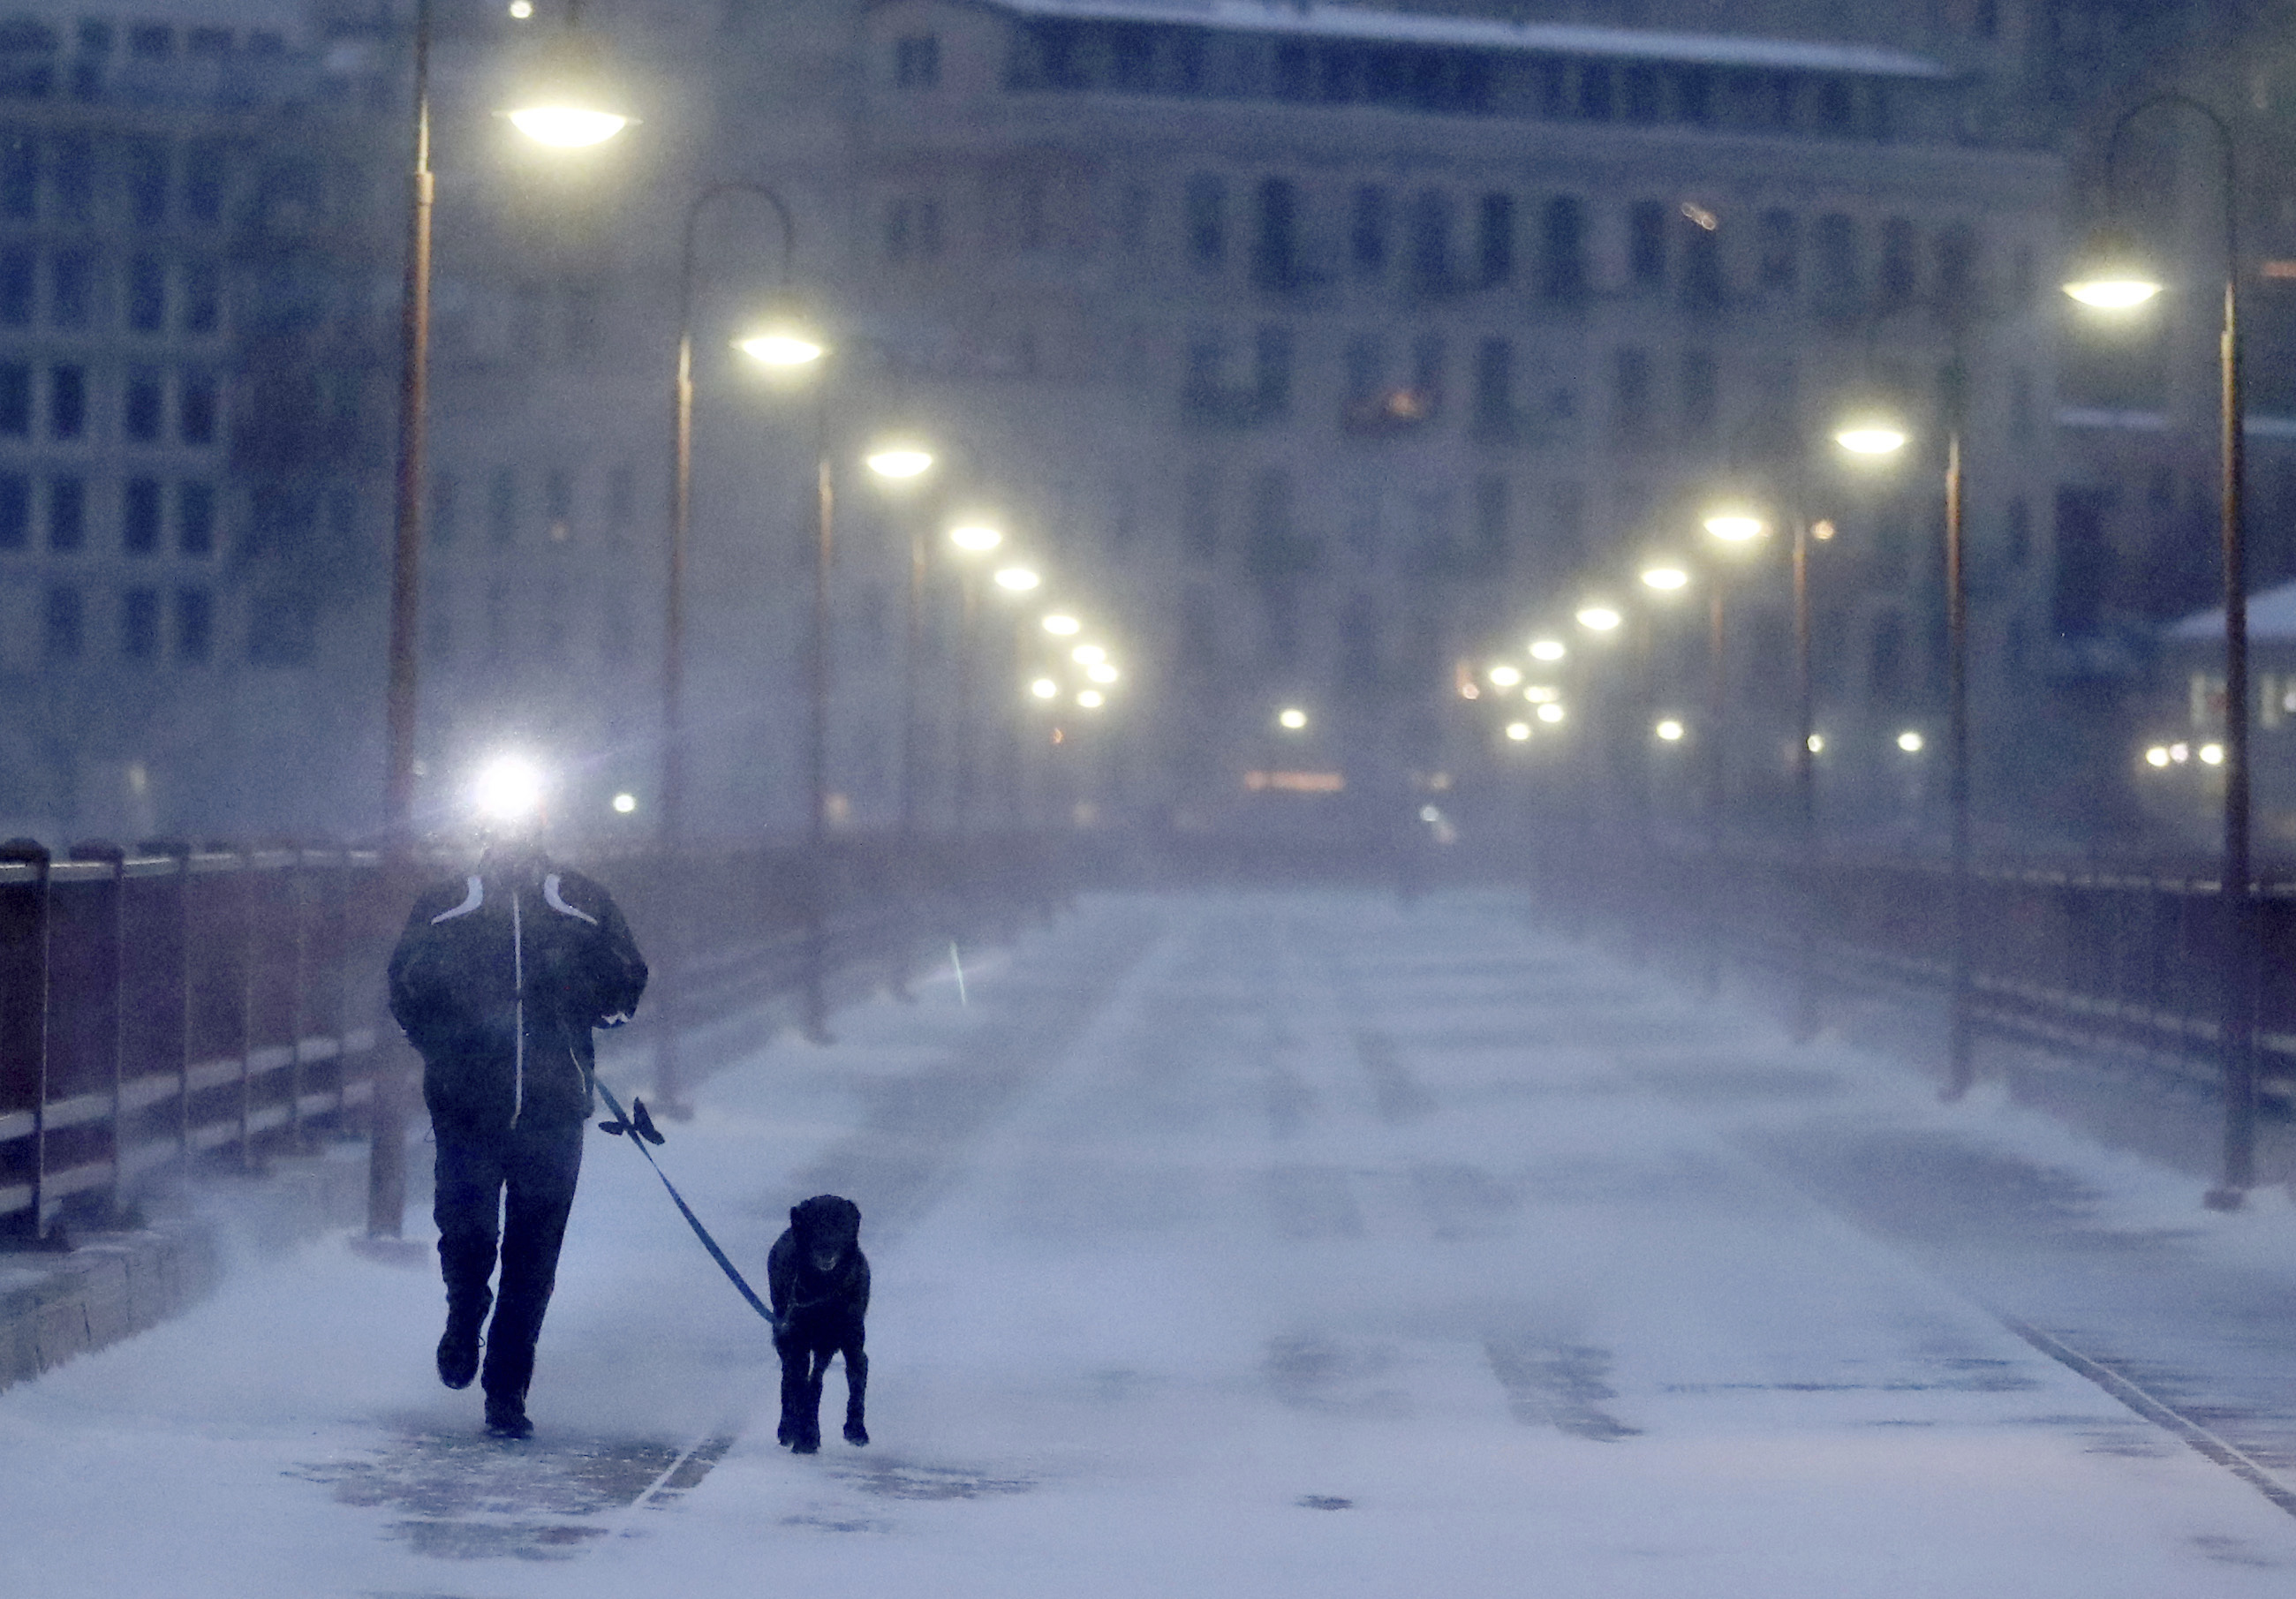 A runner and his dog brave frigid conditions while making their way east across the Stone Arch Bridge, Thursday, Jan. 24, 2019, in Minneapolis.   The National Weather Service issued a wind child advisory overnight Thursday for Wisconsin, Minnesota, the Dakotas and several other states. (David Joles/Star Tribune via AP)